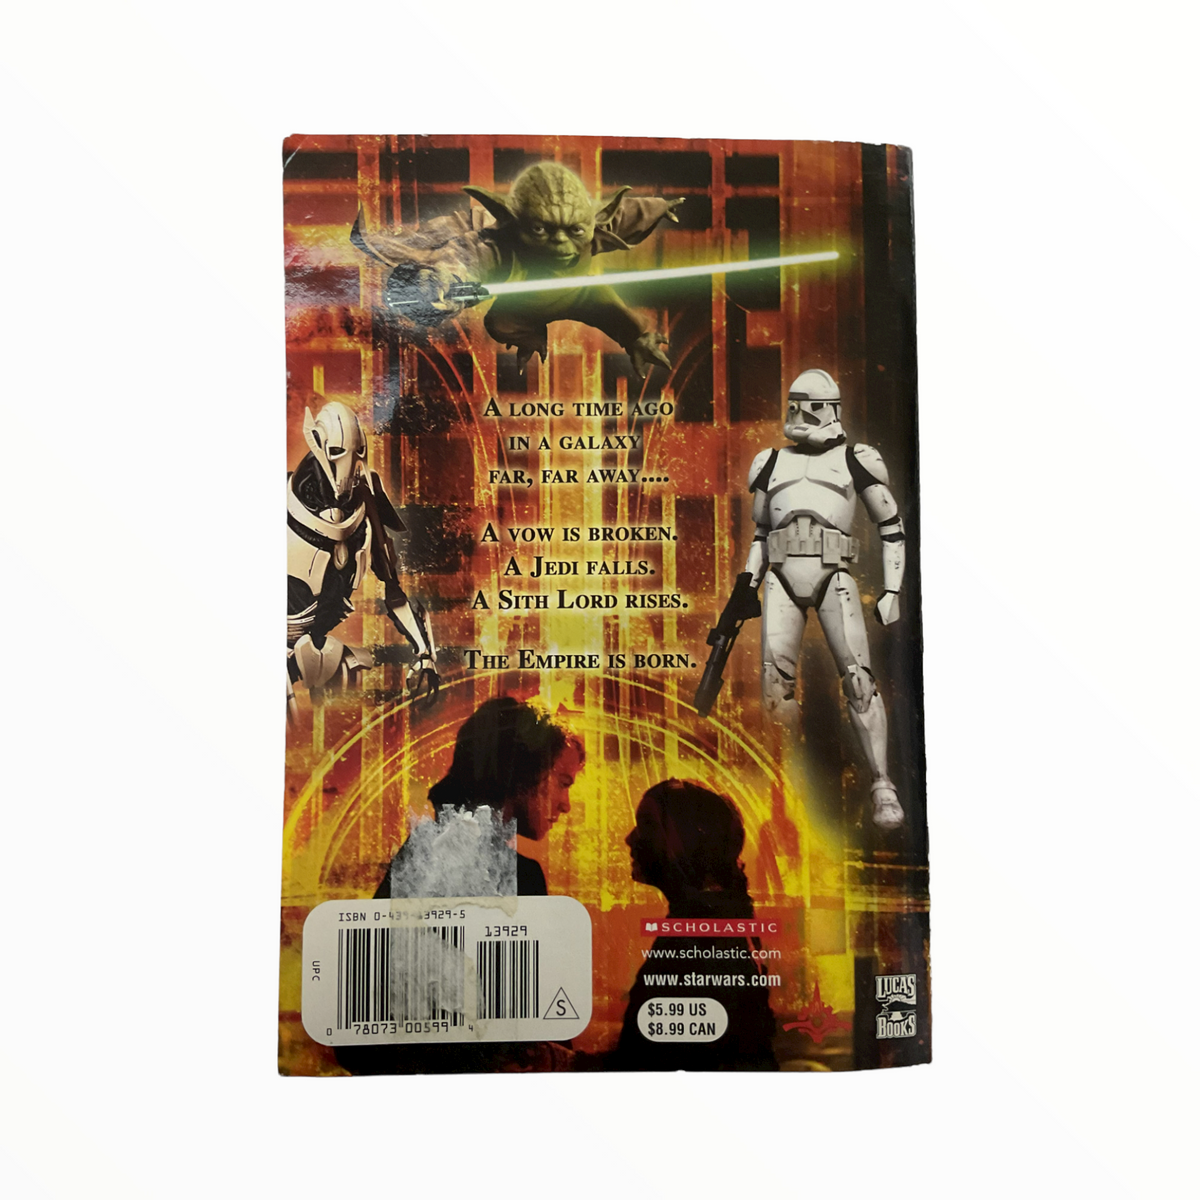 Star Wars Episode III Revenge Of The Sith Scholastic story Book